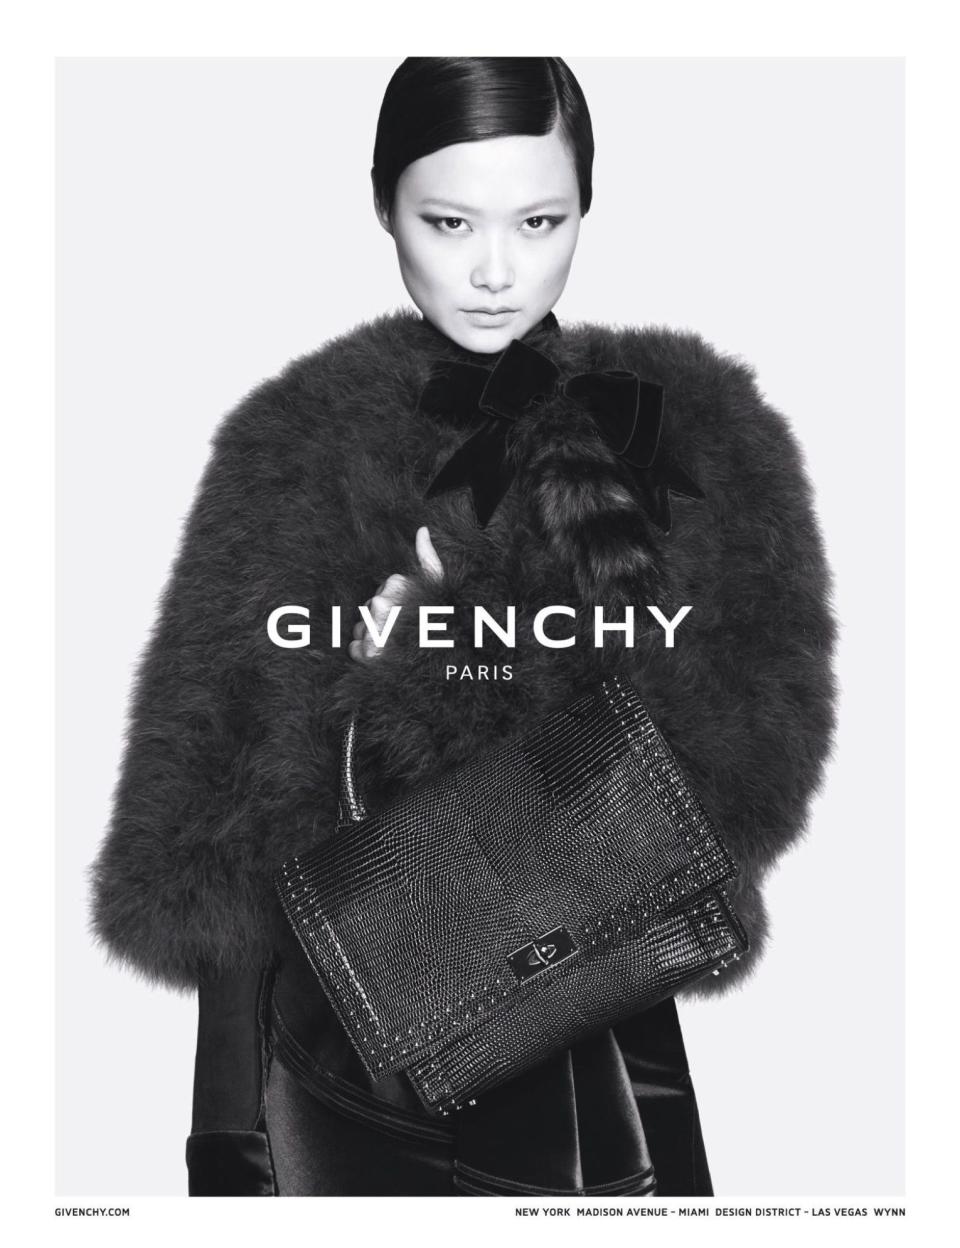 Chris Lee featured in the Givenchy fall 2015 ad campaign.